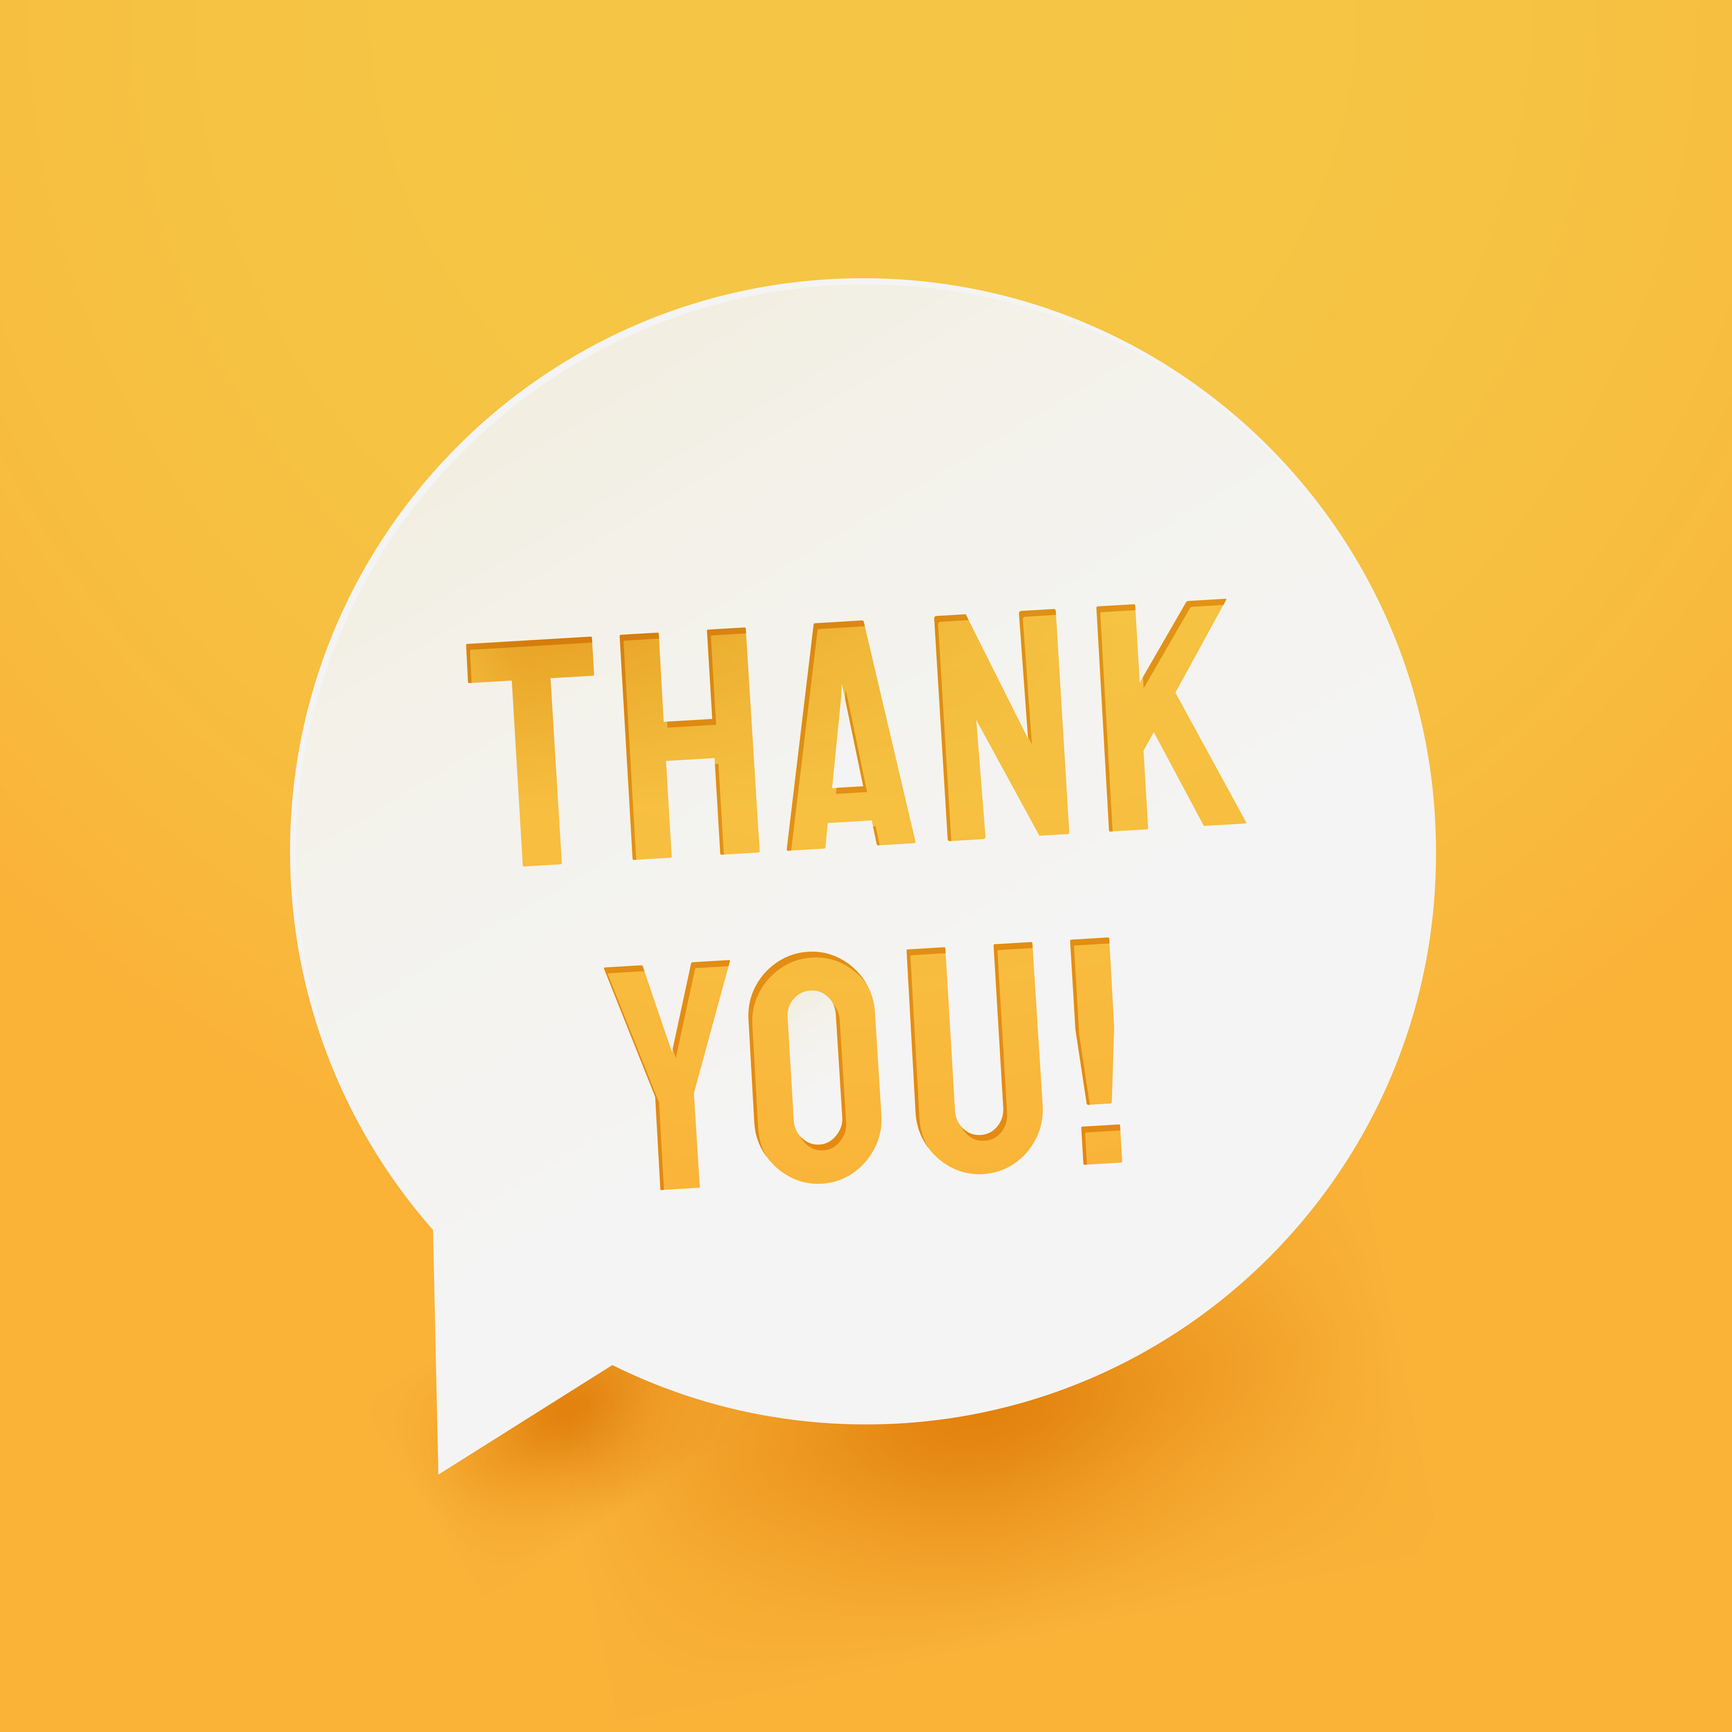 Stock graphic, yellow square with talking bubble inside with the words Thank You!